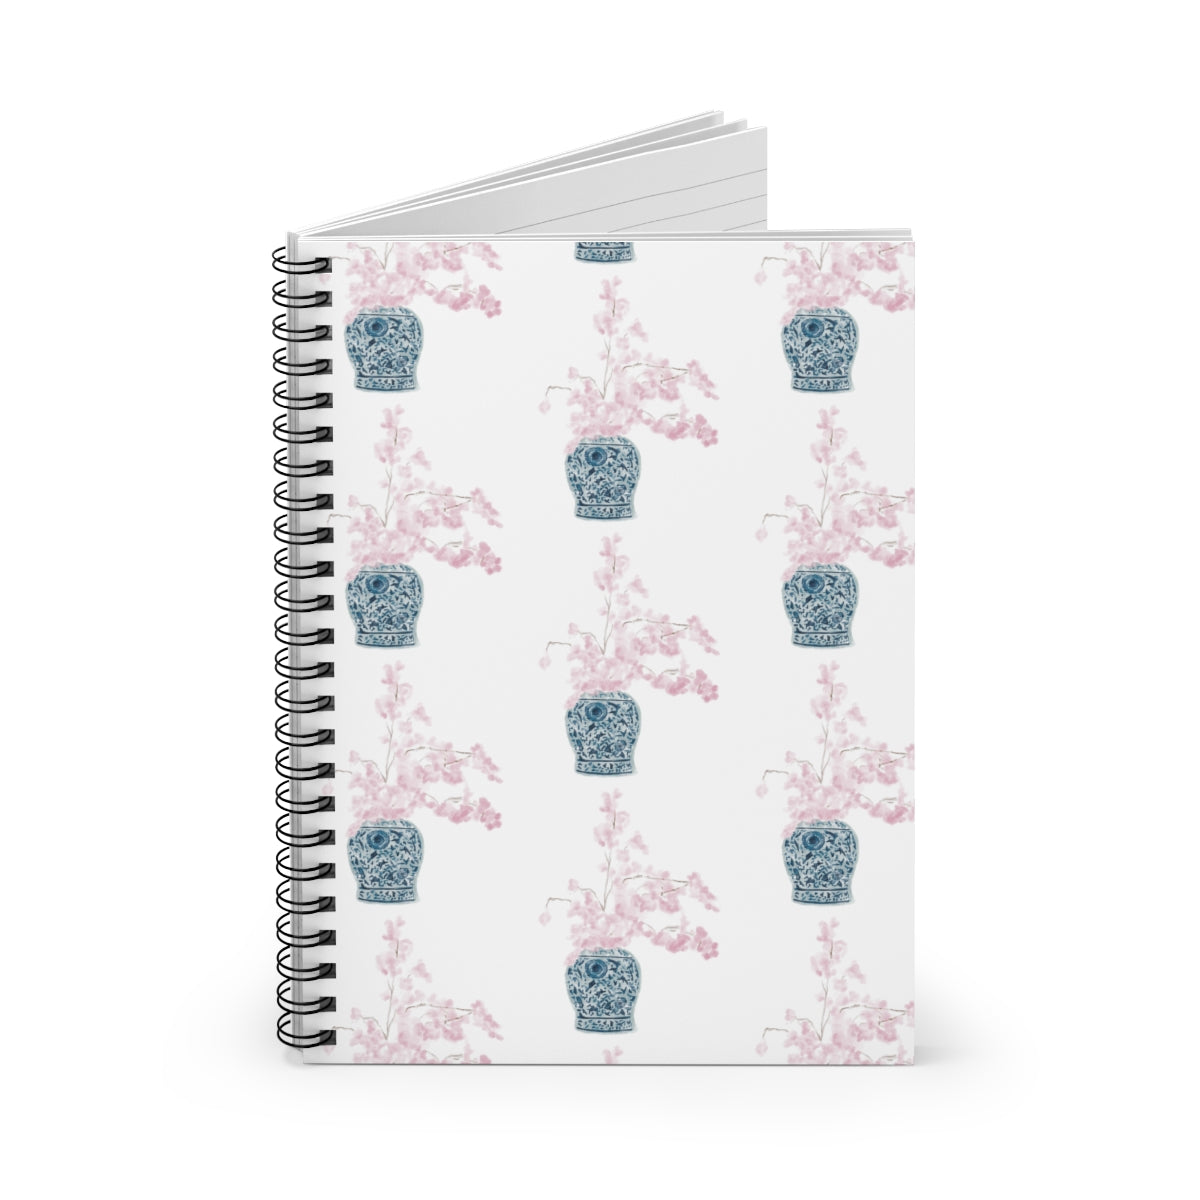 VASE WITH PINK FLOWERS NOTEBOOK - BRYKNOLO LLC Paper products